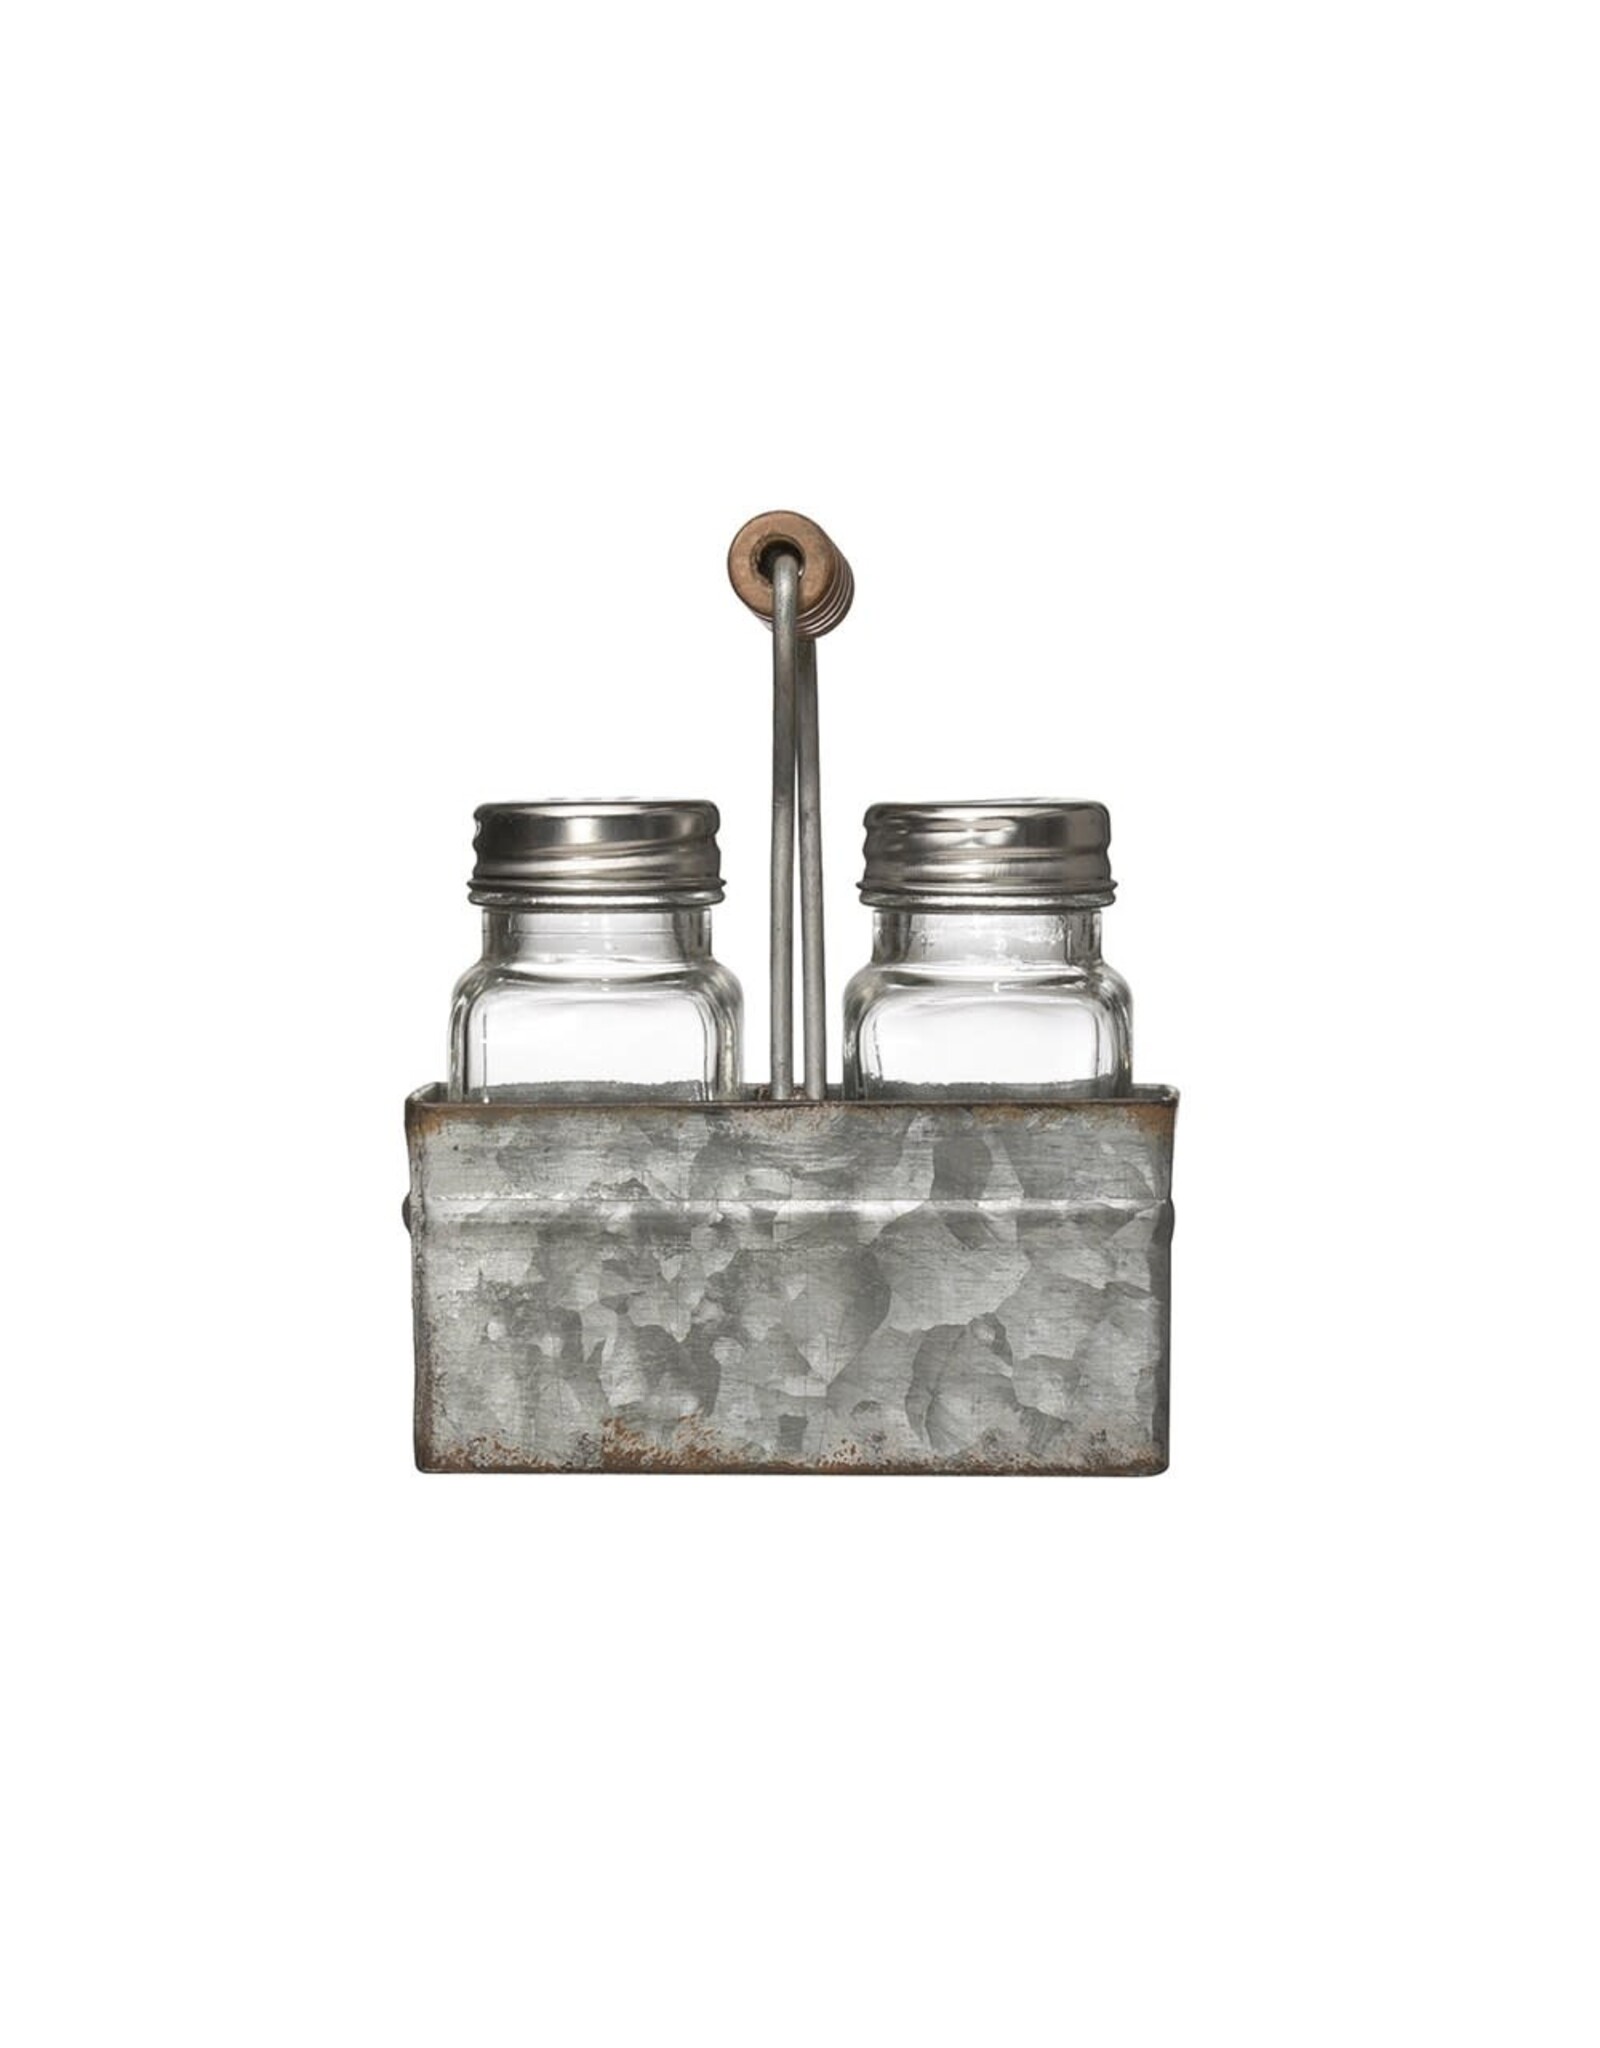 Glass S&P Shakers in Galvanized Metal Caddy DF2709